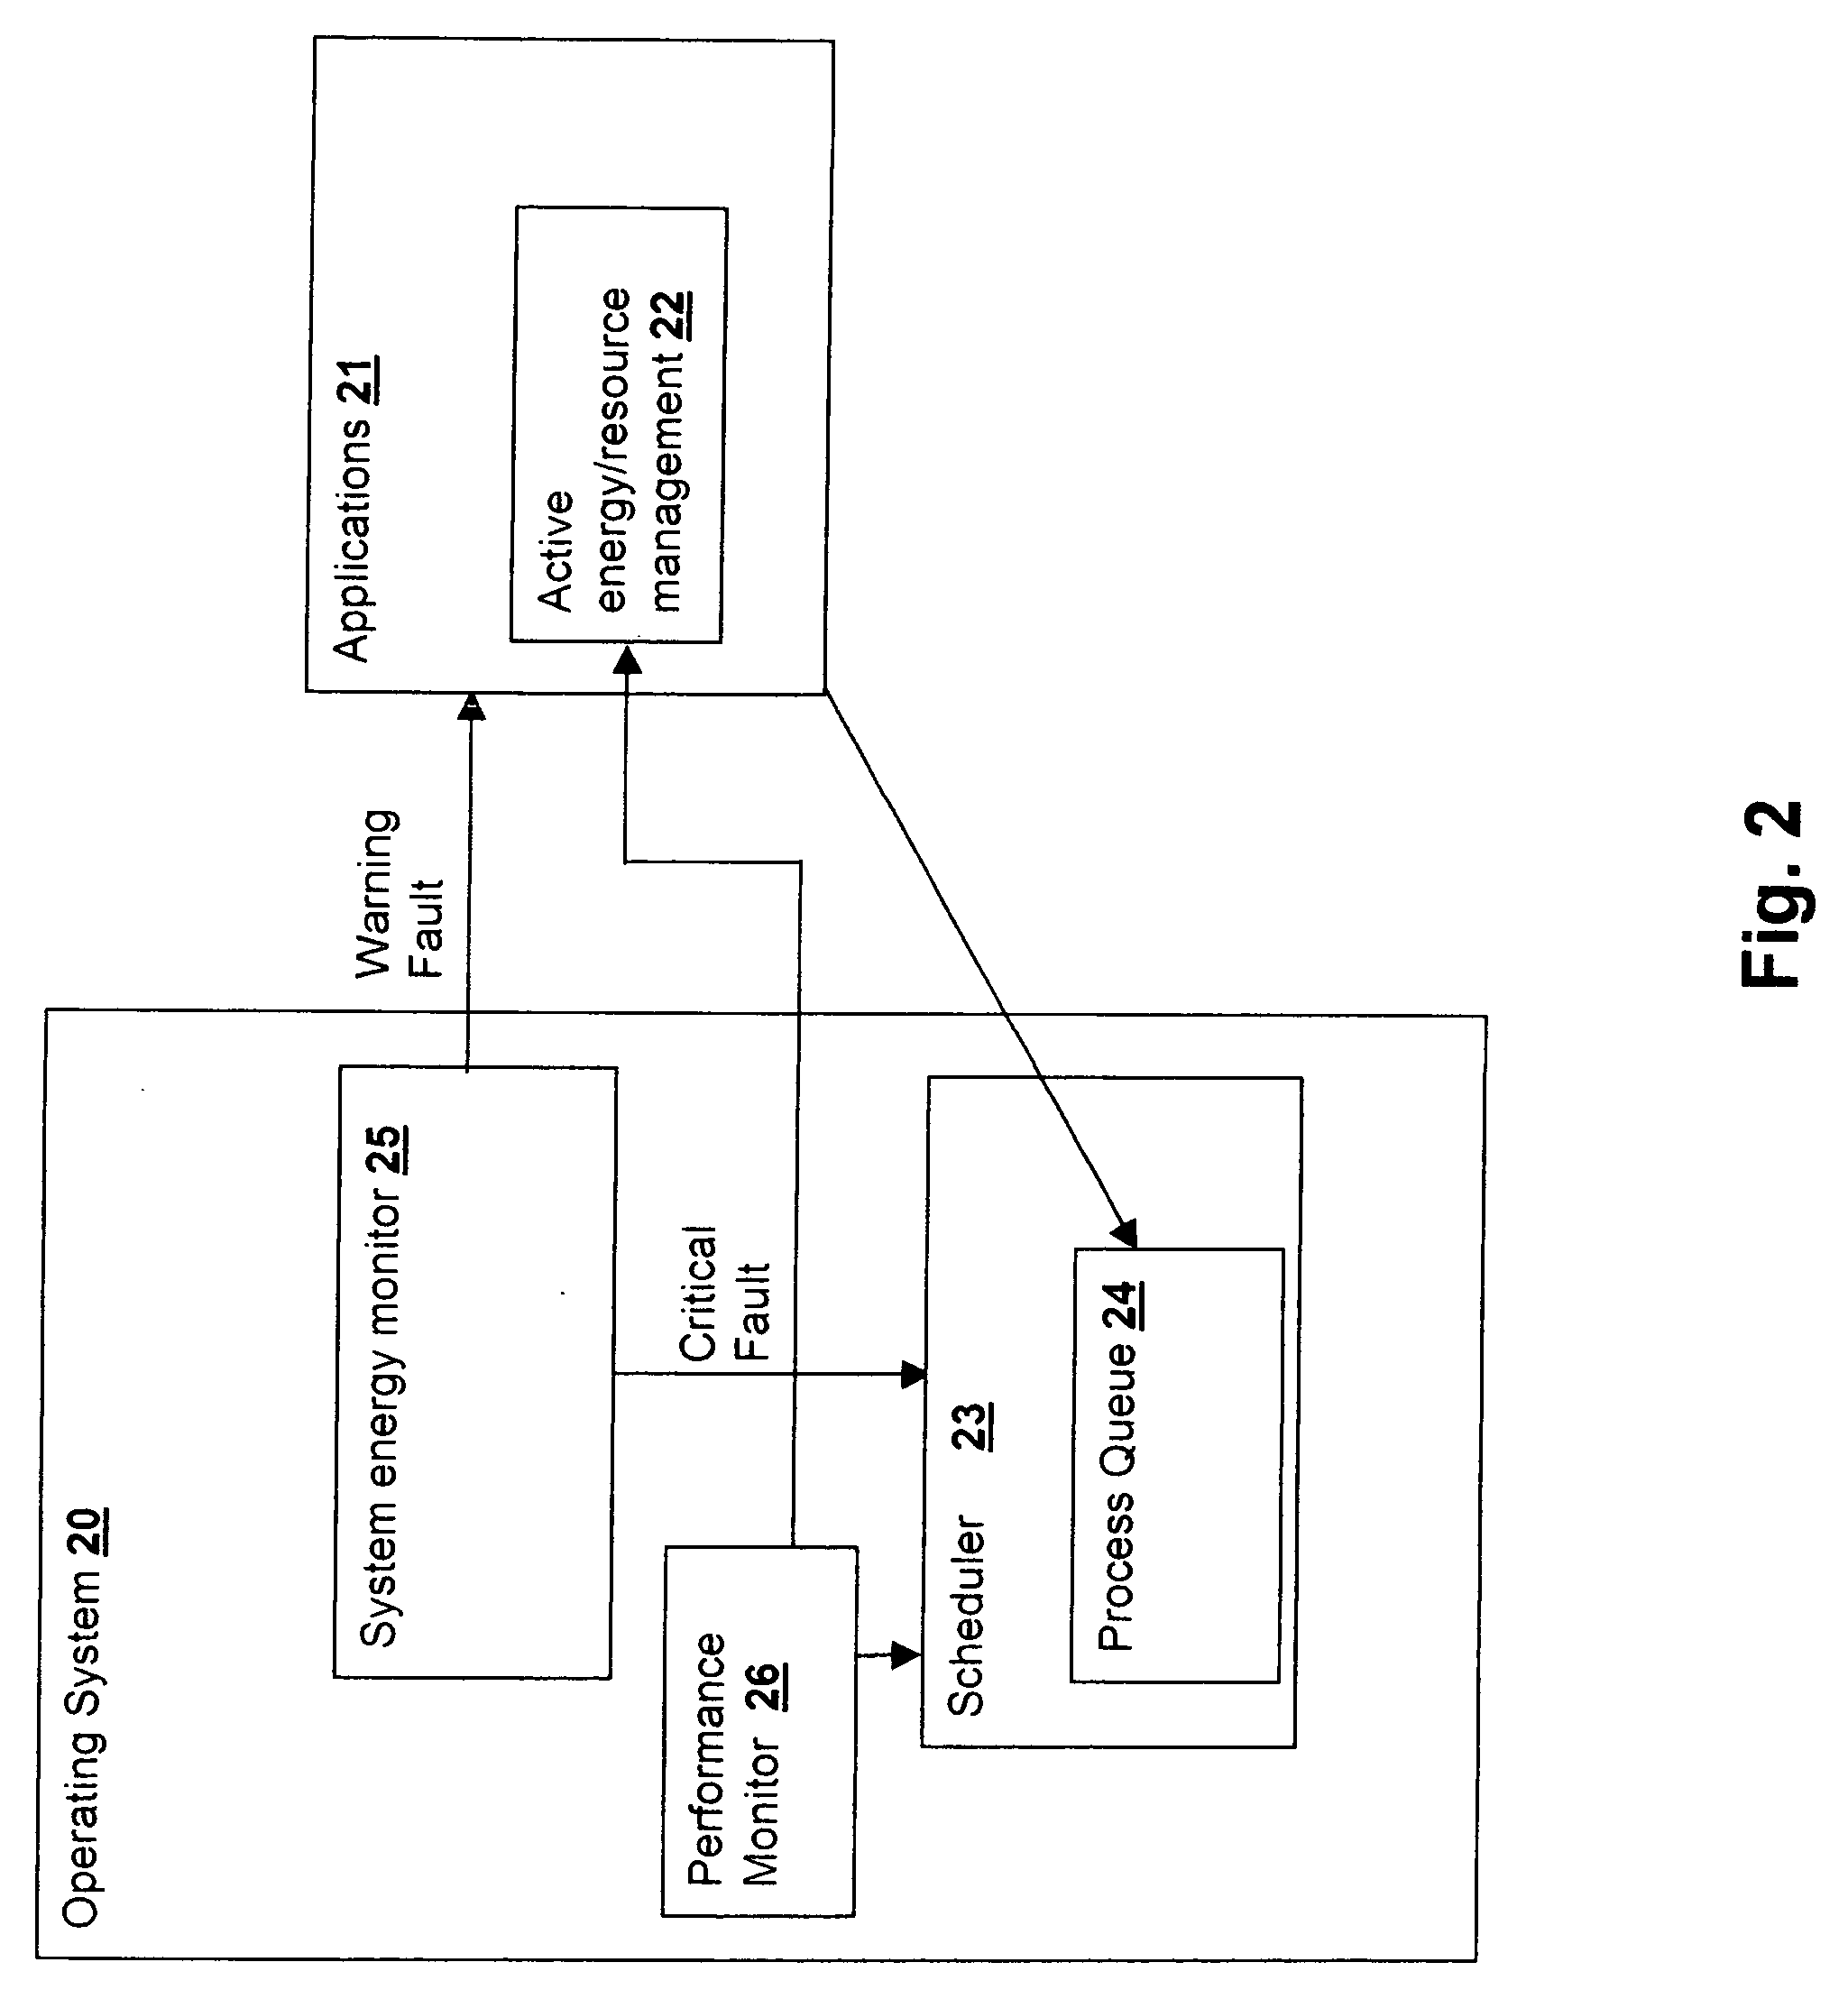 Method and system for energy management via energy-aware process scheduling